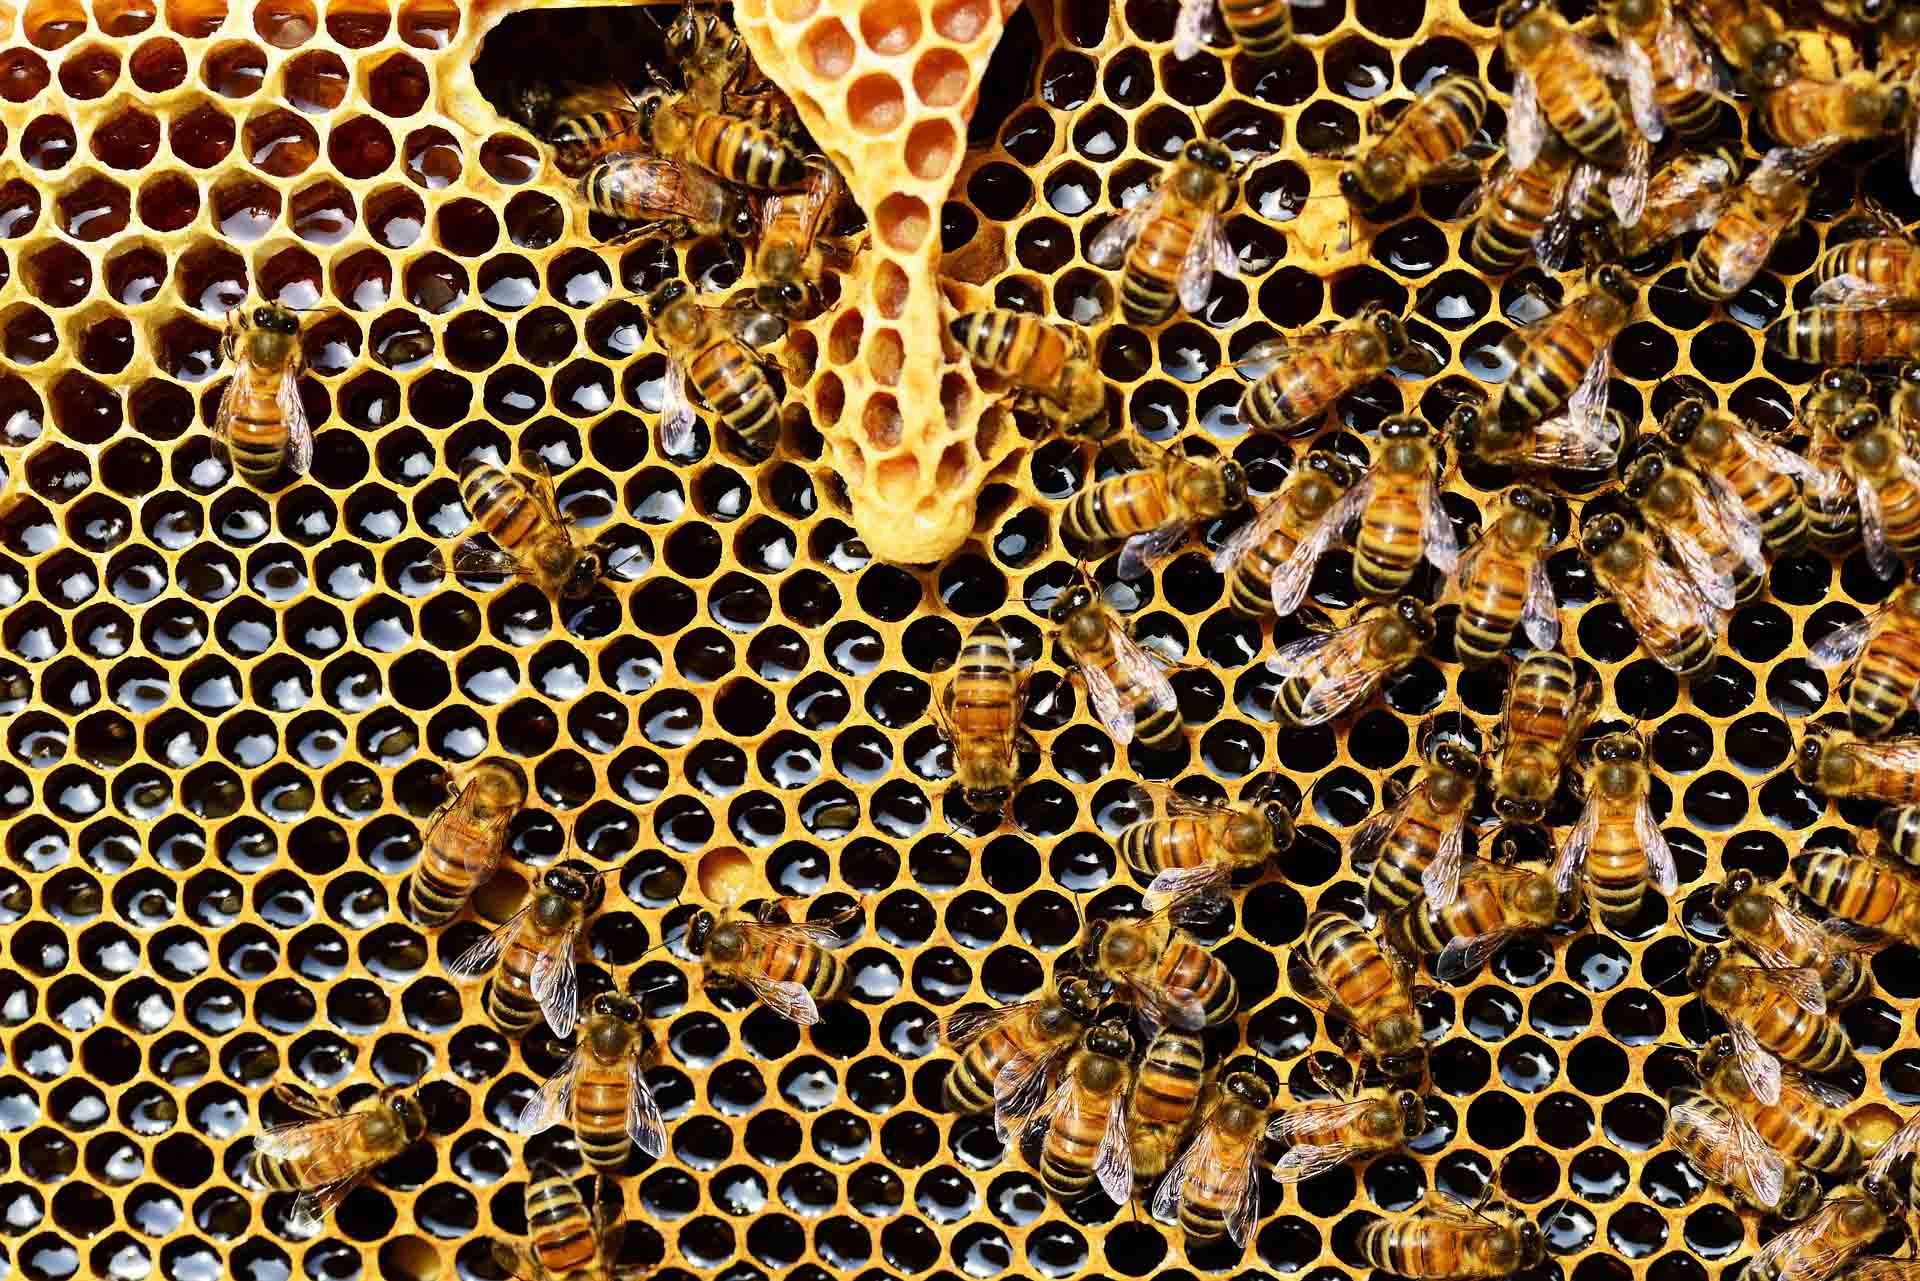 A closeup picture of a honeycomb with bees on it.